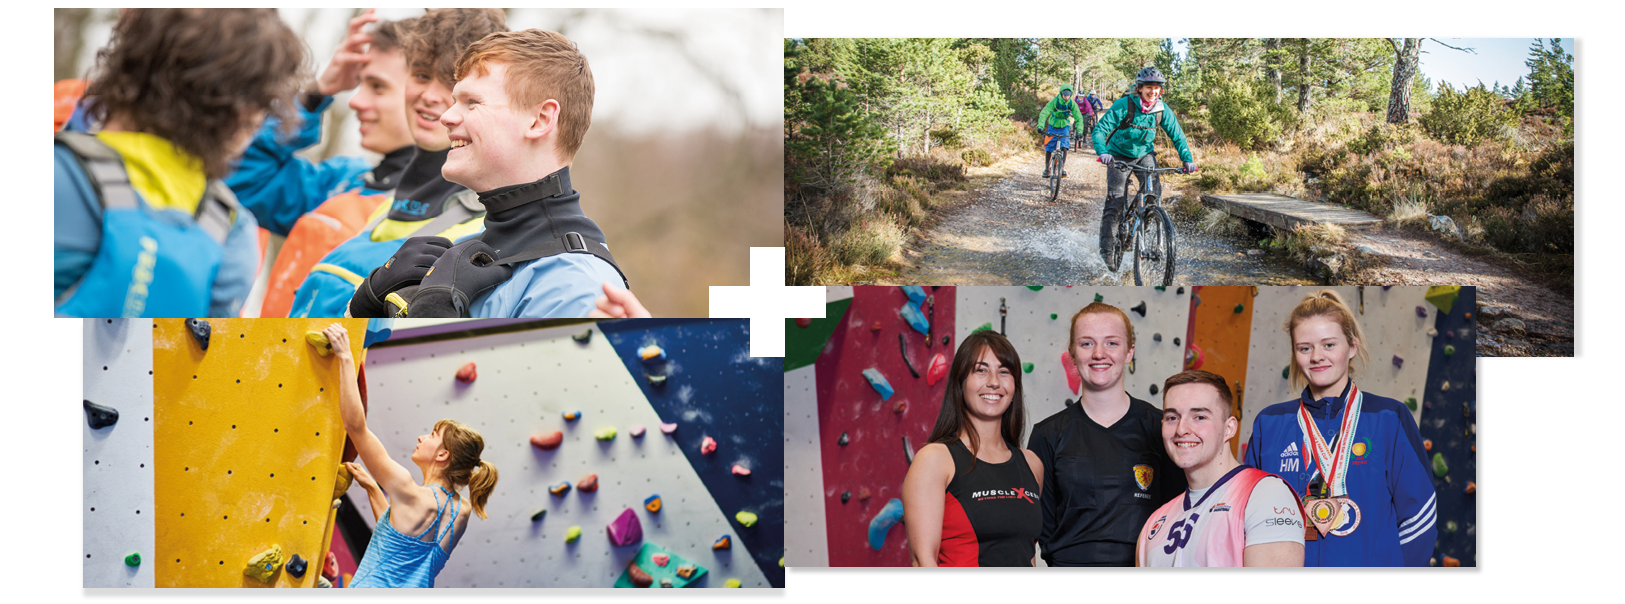 Collage of 4 | Students on a kayak trip | Students cycling in a forest | Student climbing on a climbing wall | Group of students smiling in front of a climbing wall